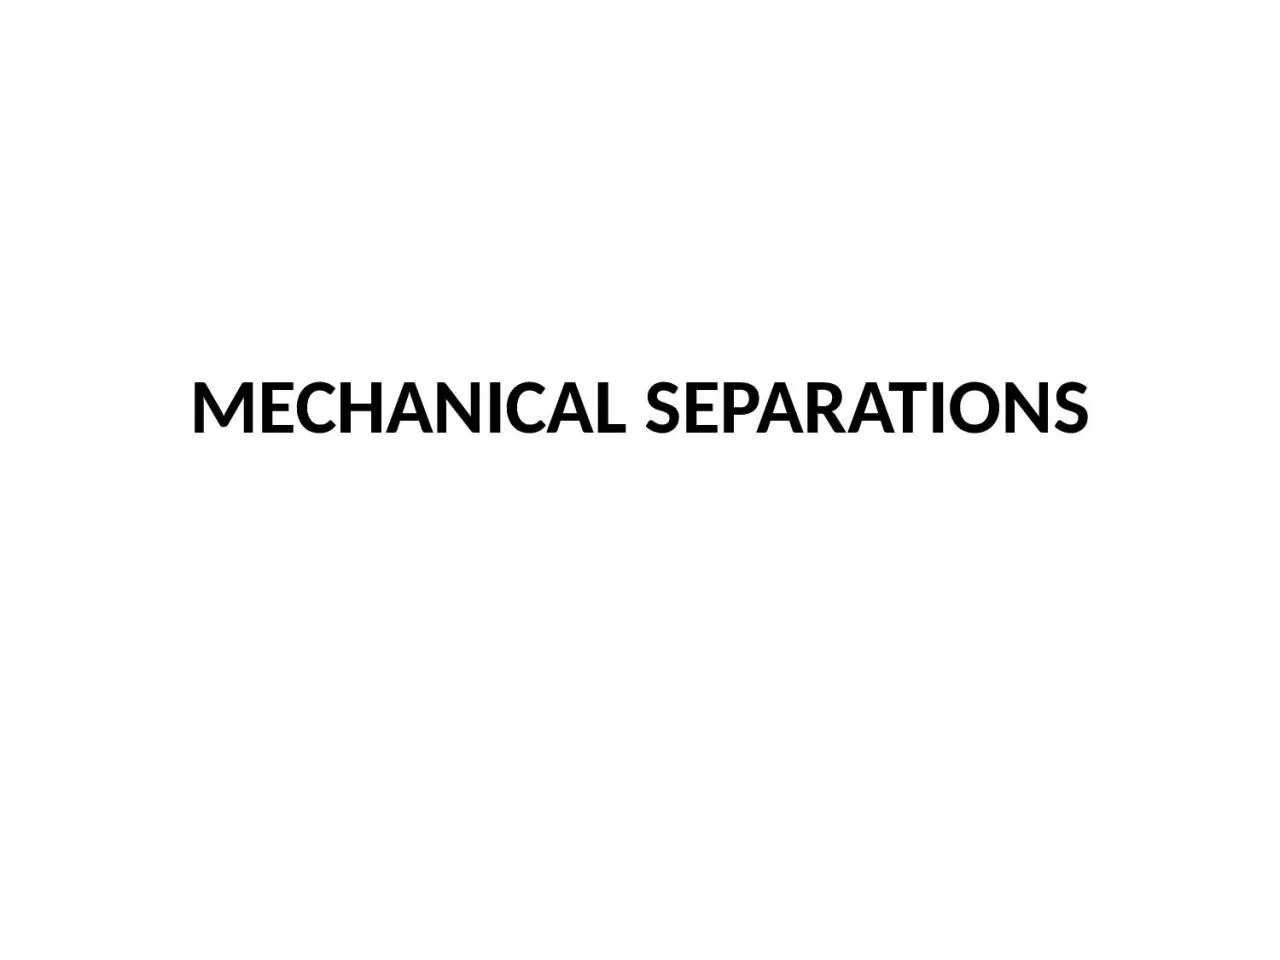 MECHANICAL SEPARATIONS Introduction